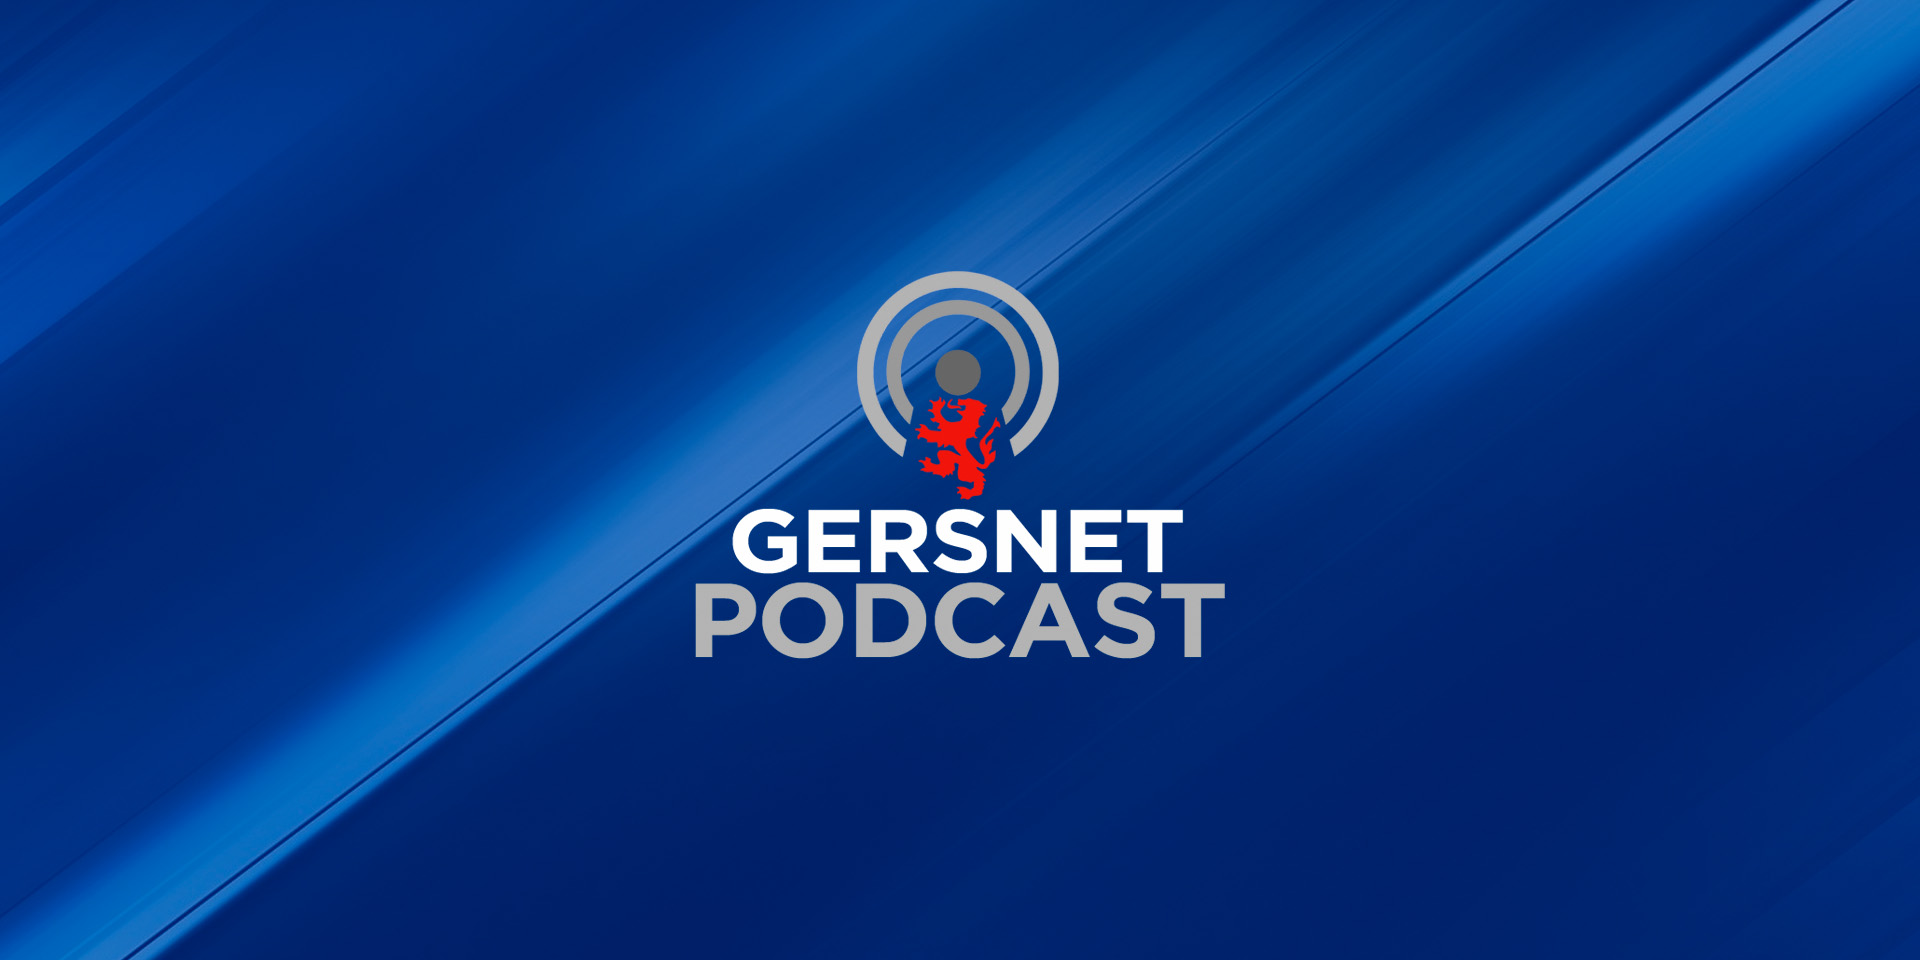 Gersnet Podcast 257 - Competed but Cheated?